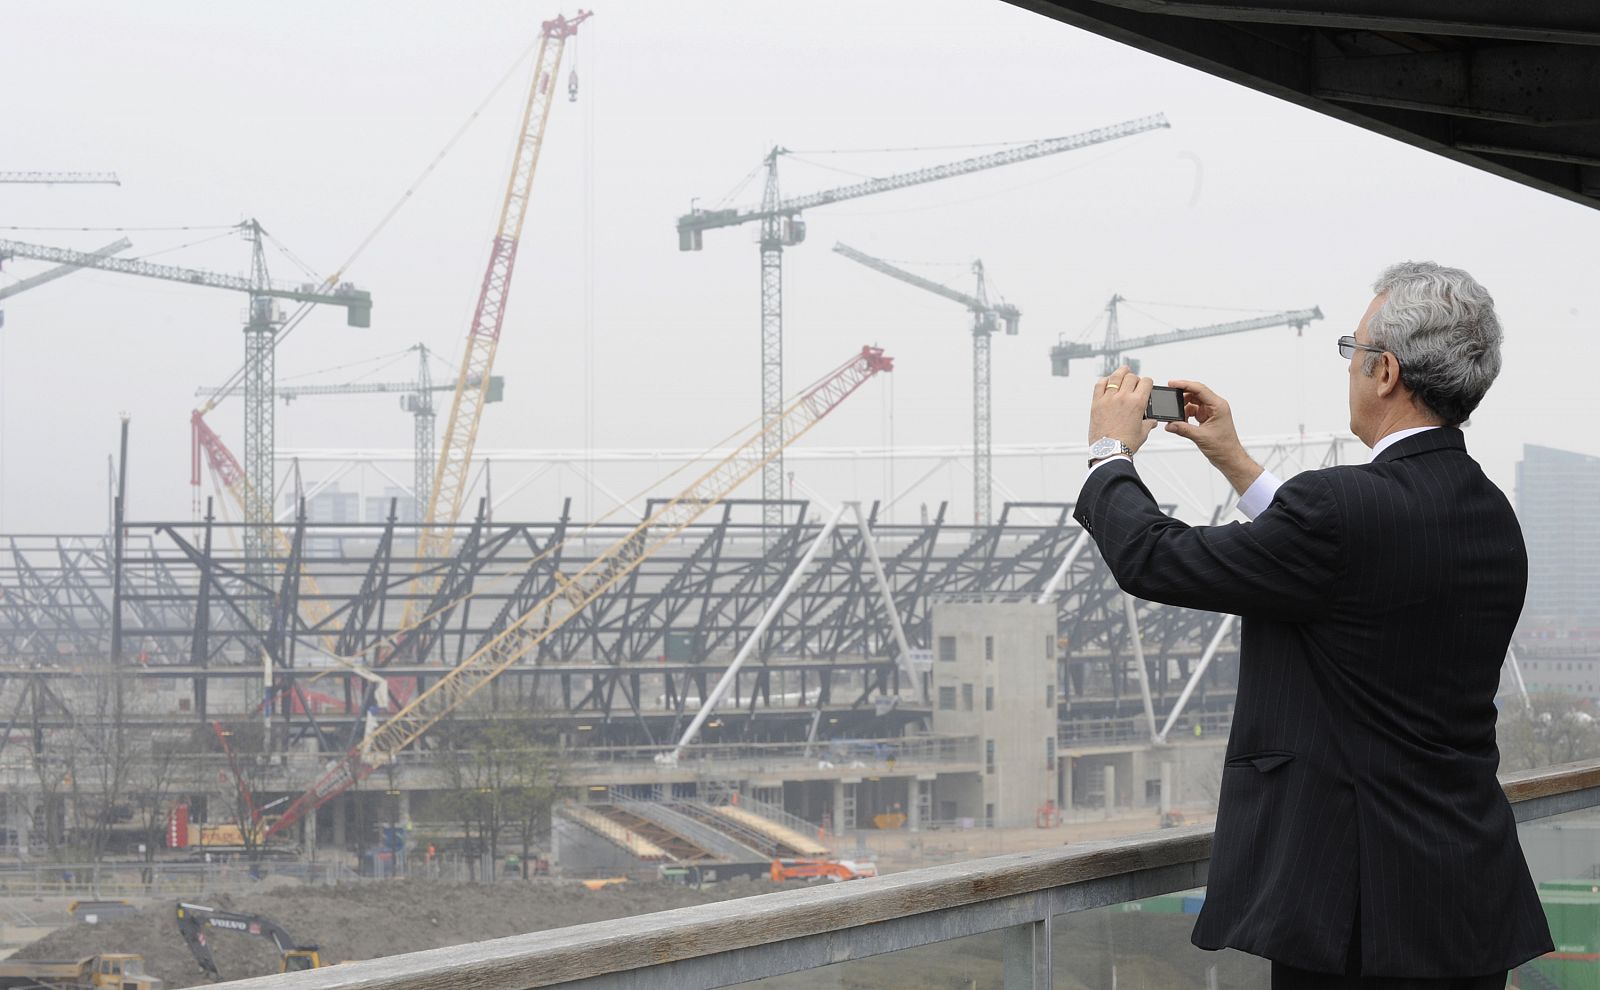 A man photographs the main Olympic Stadium construction at Stratford in east London